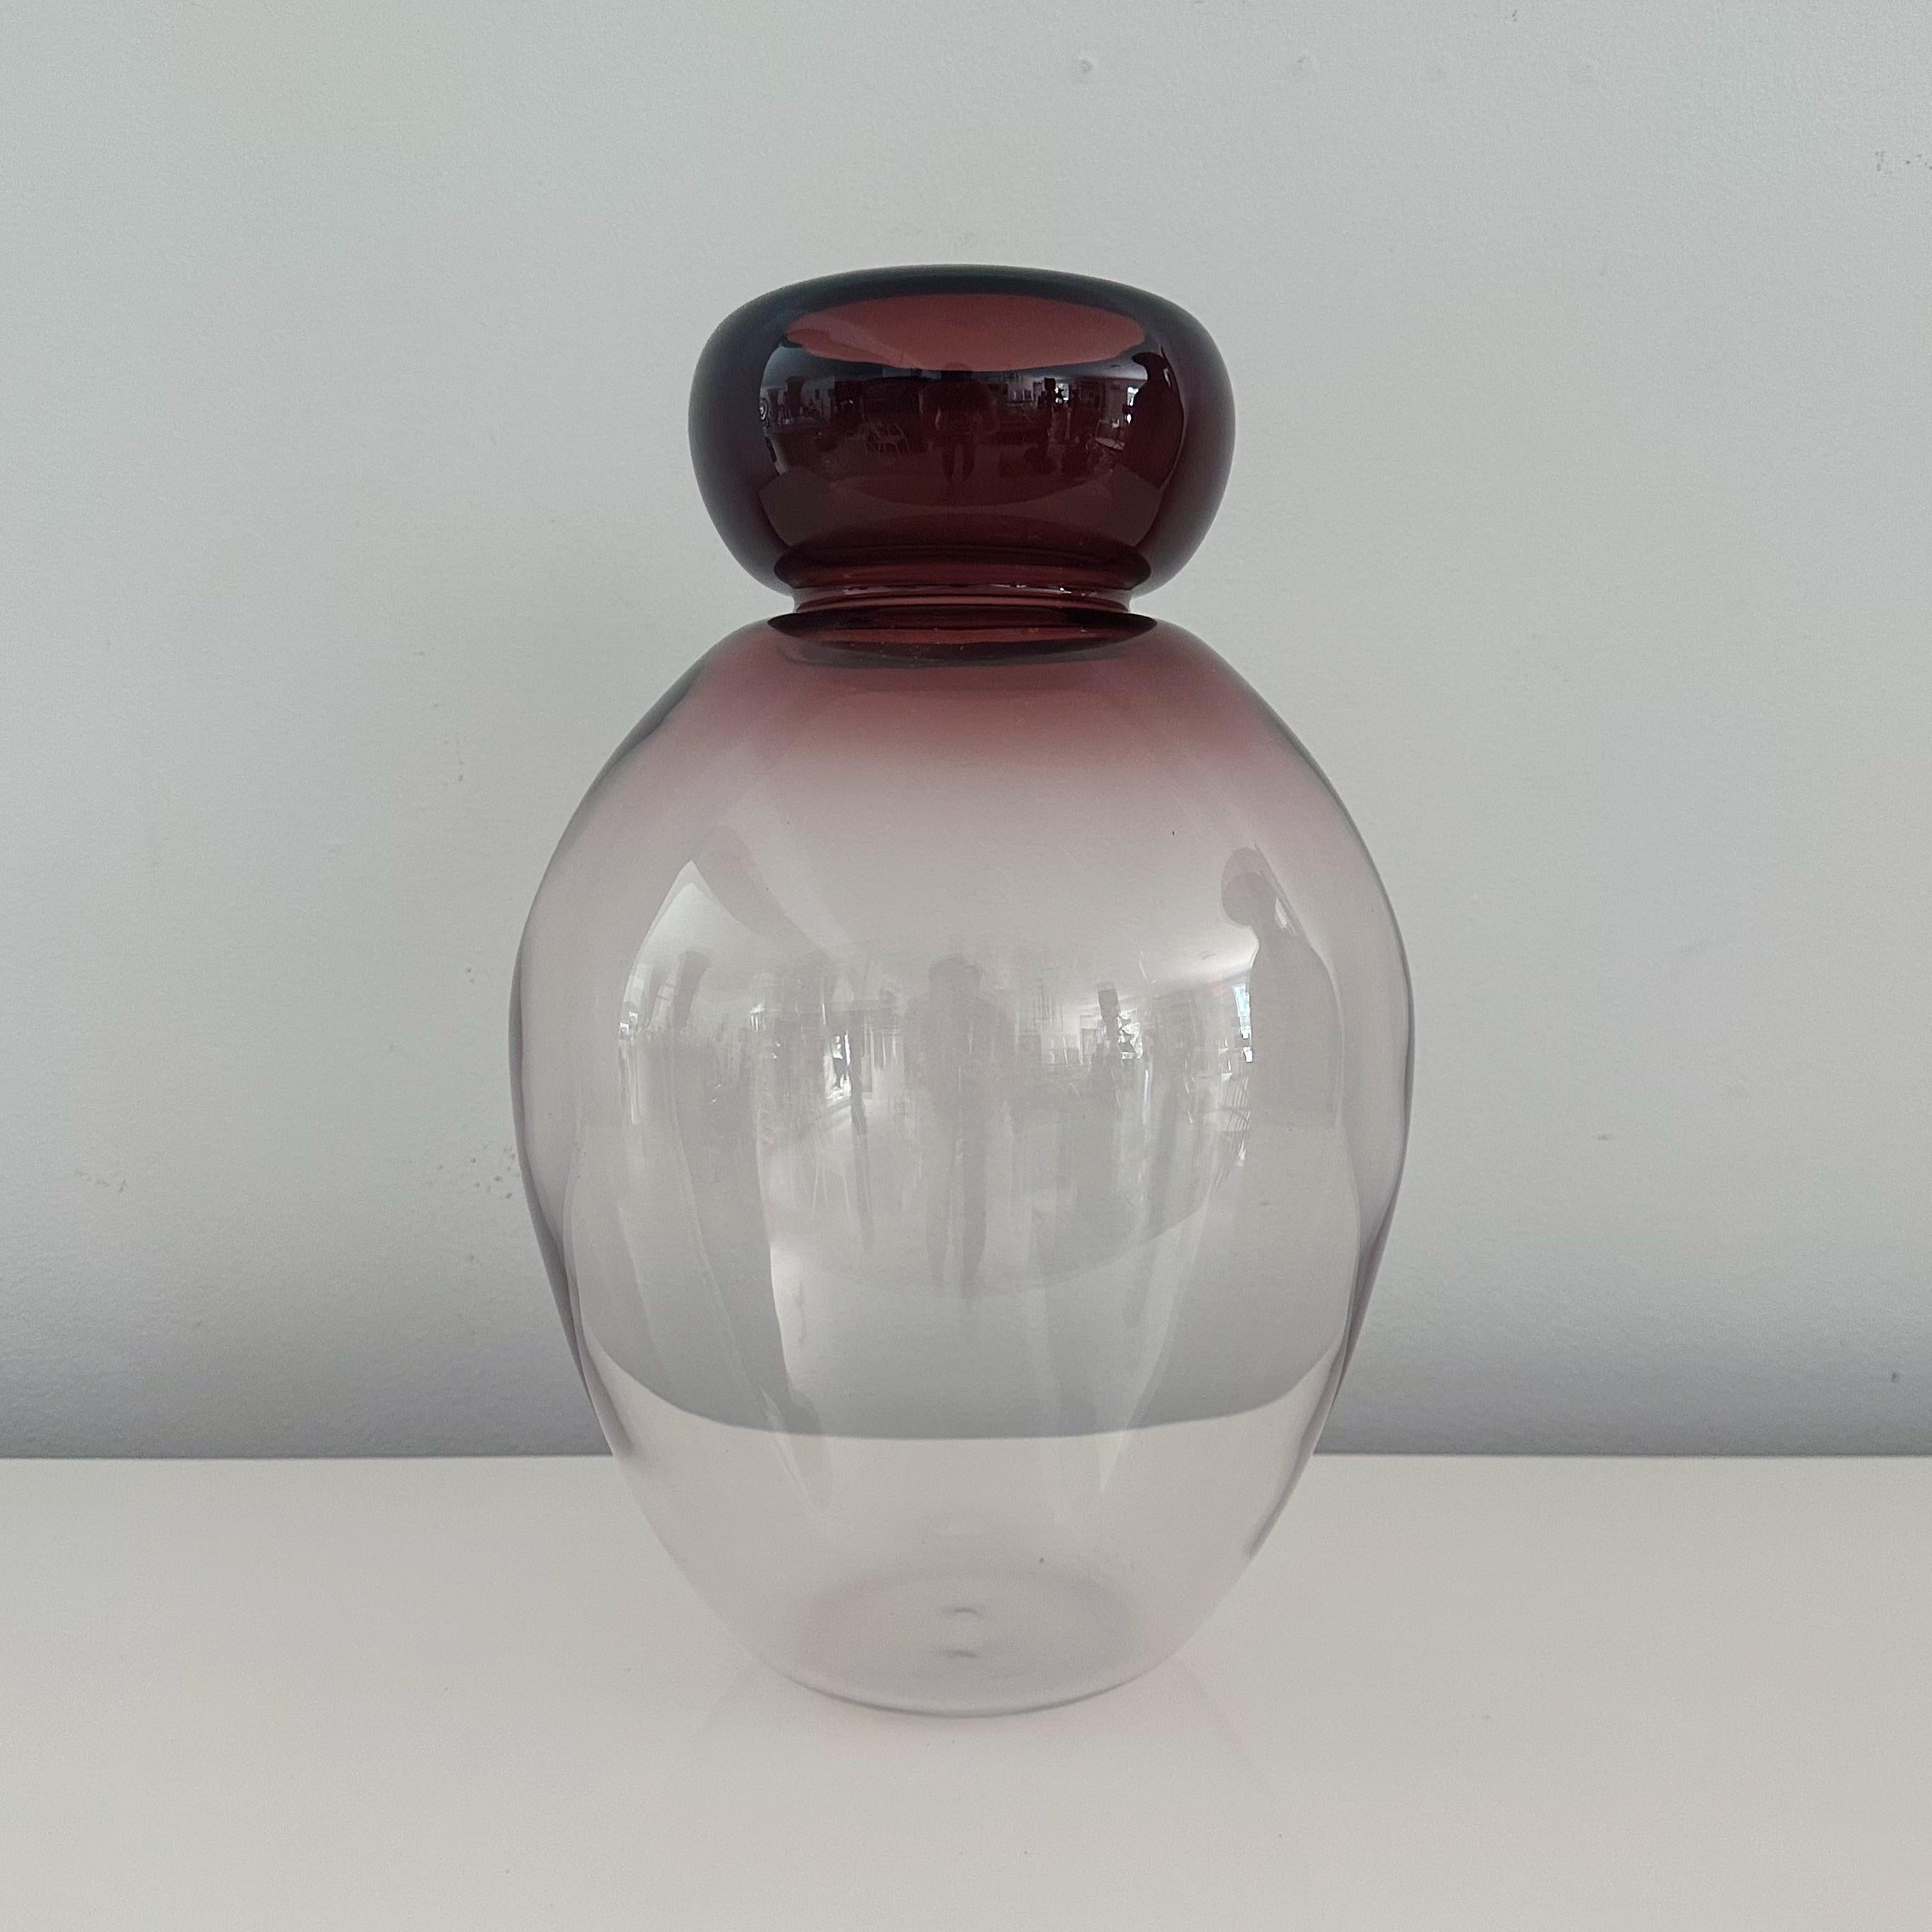 The Murano vase showcases large, bulbous shapes in captivating shades of cranberry that gradually transition into a transparent glass. Signed 